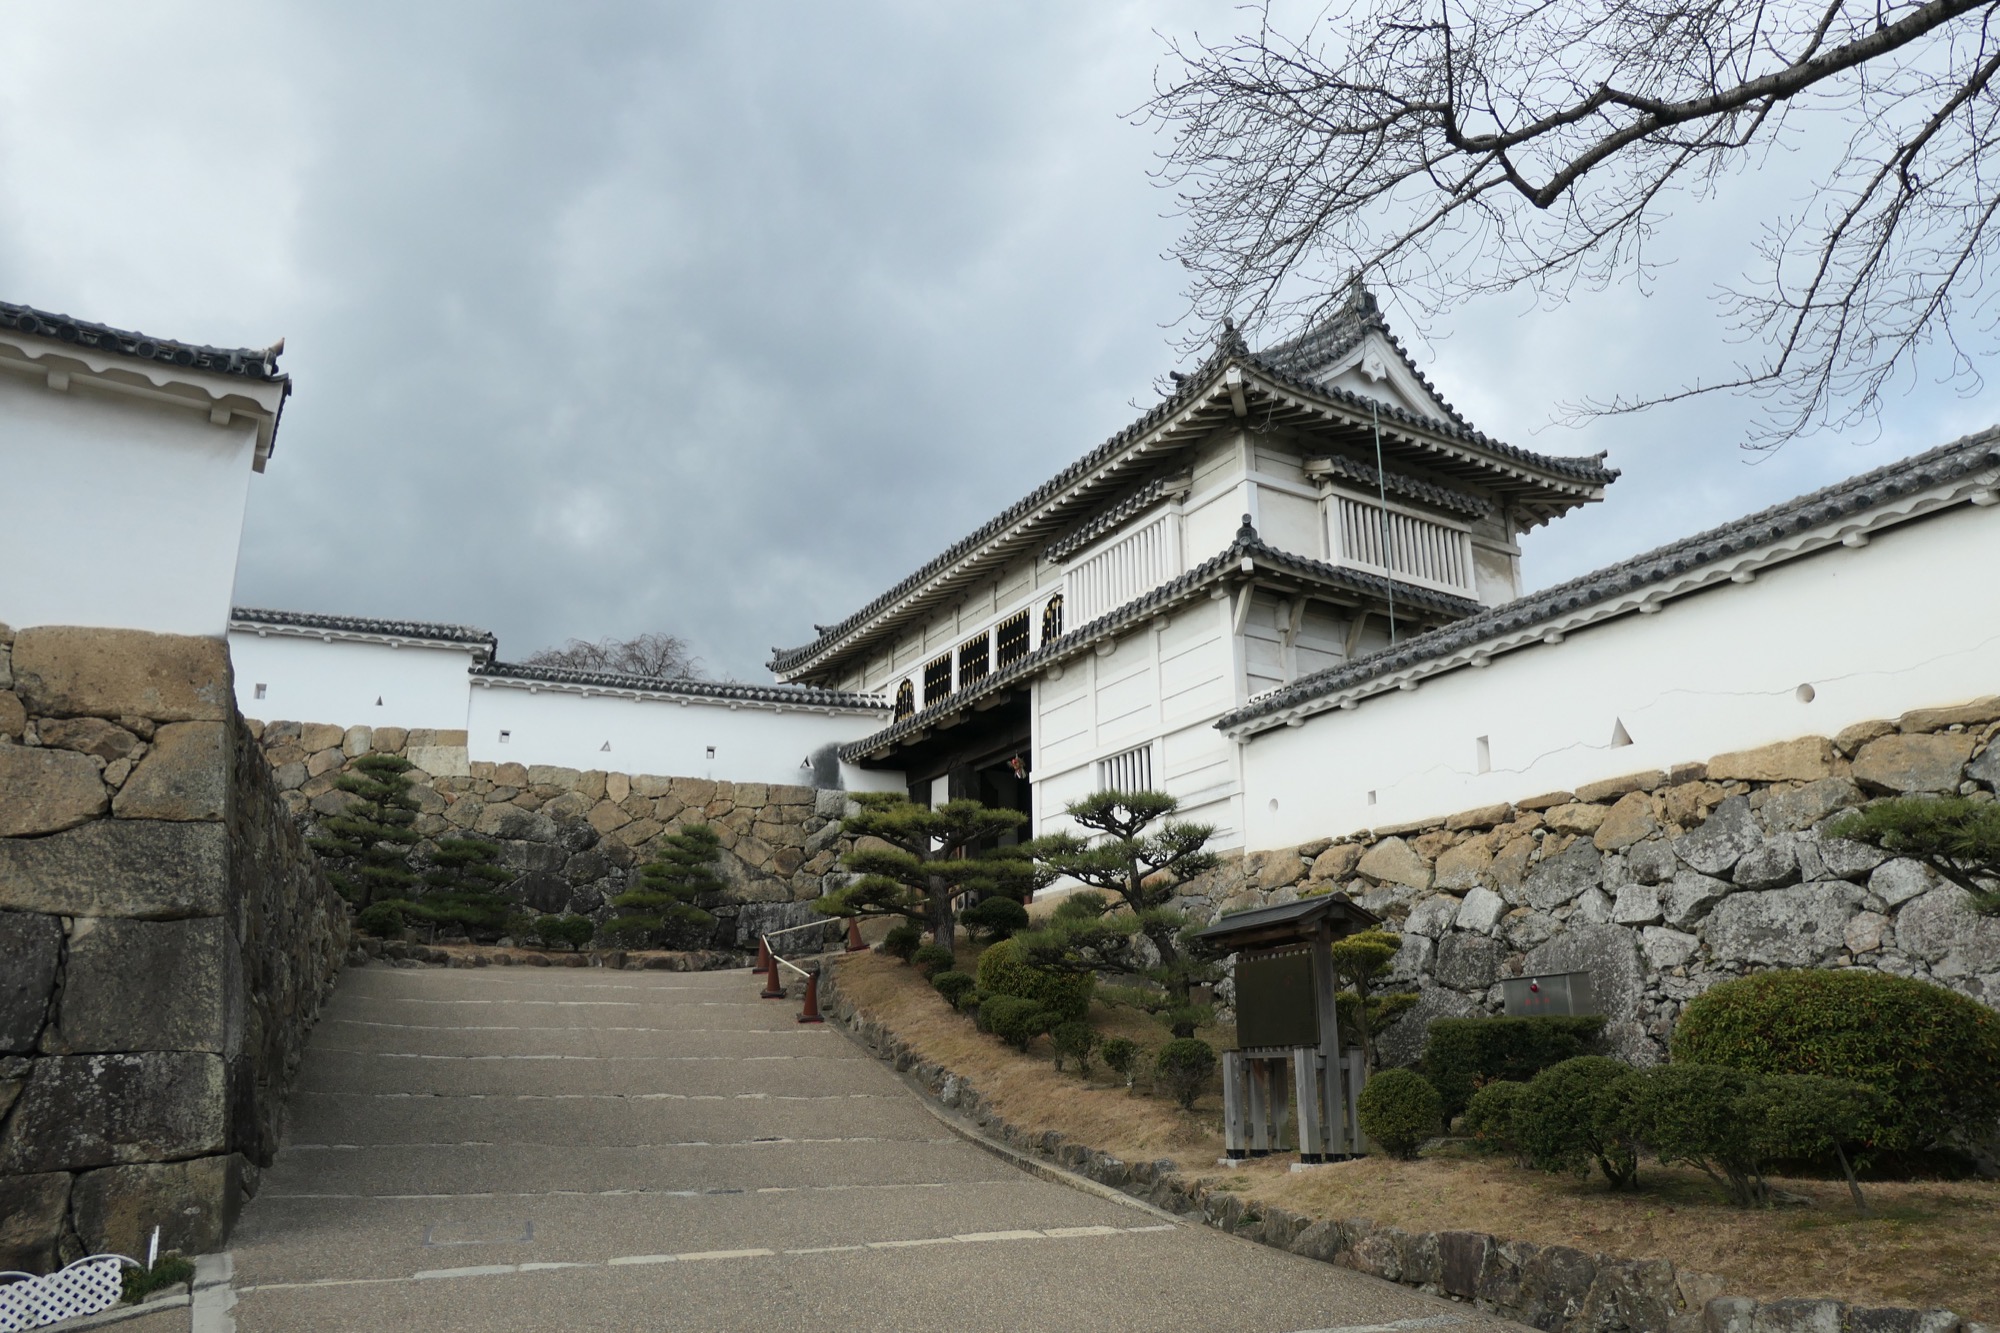 One of the gates at Himeji castle